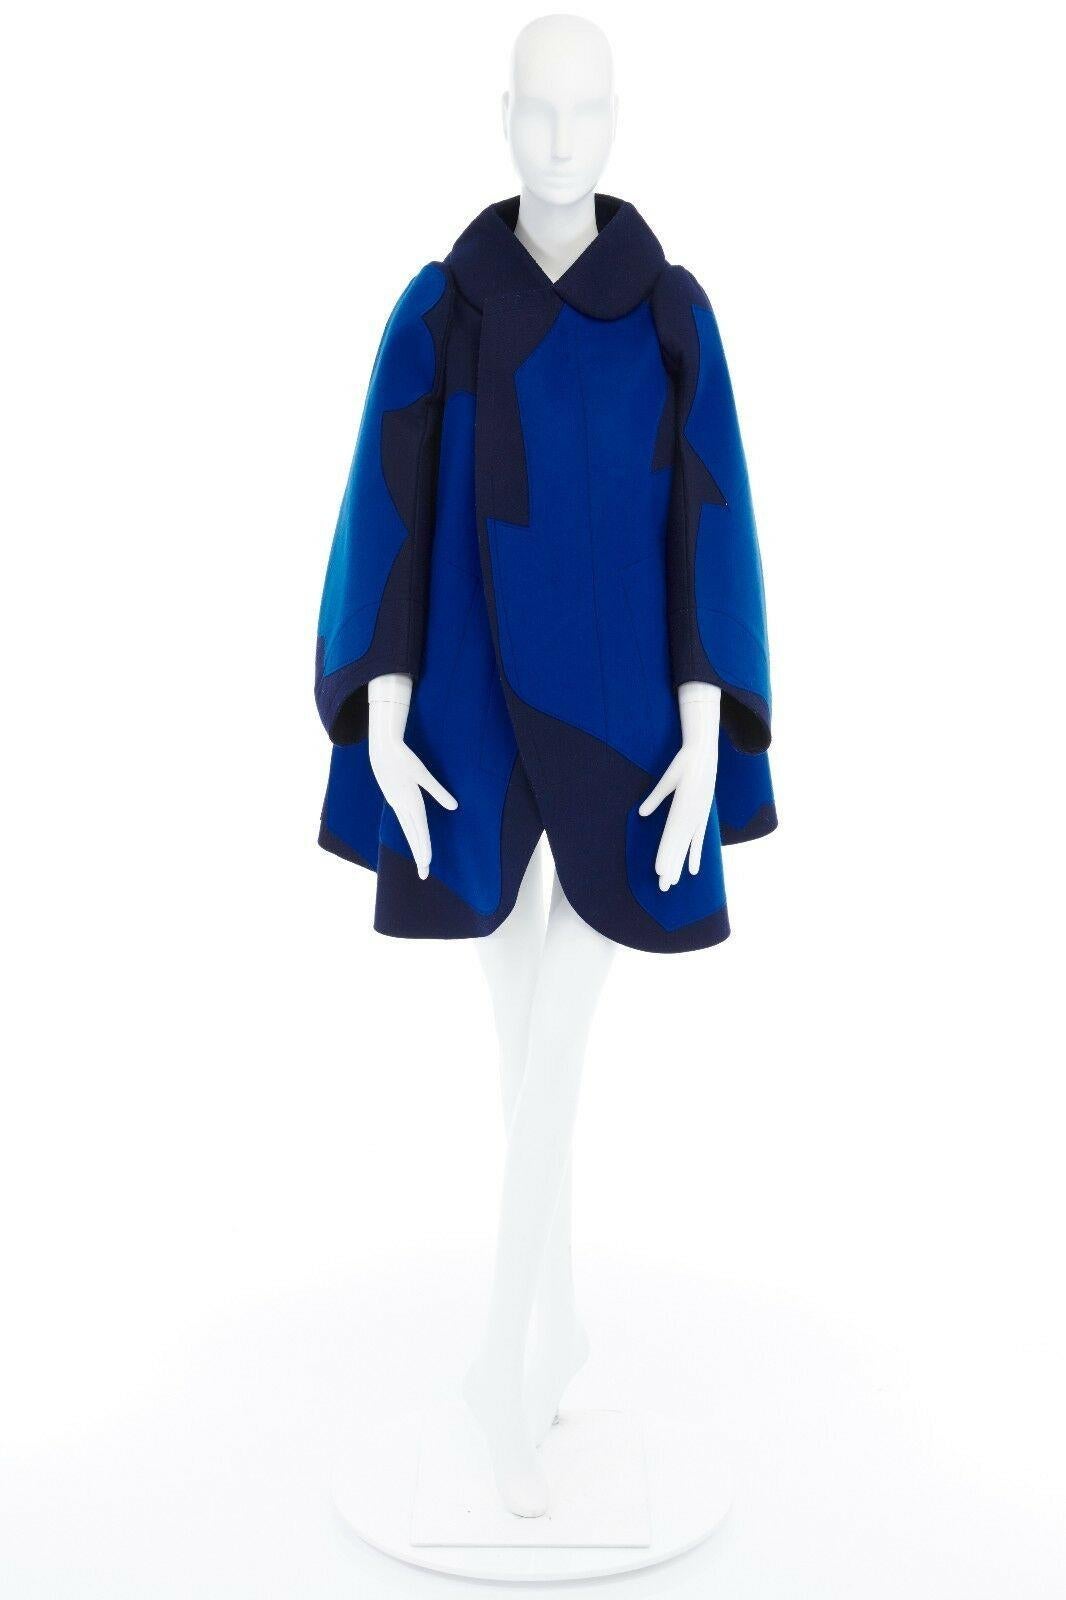 Blue new COMME DES GARCONS AD2012 flatpacked 2D blue abstract shape wool felt coat XS